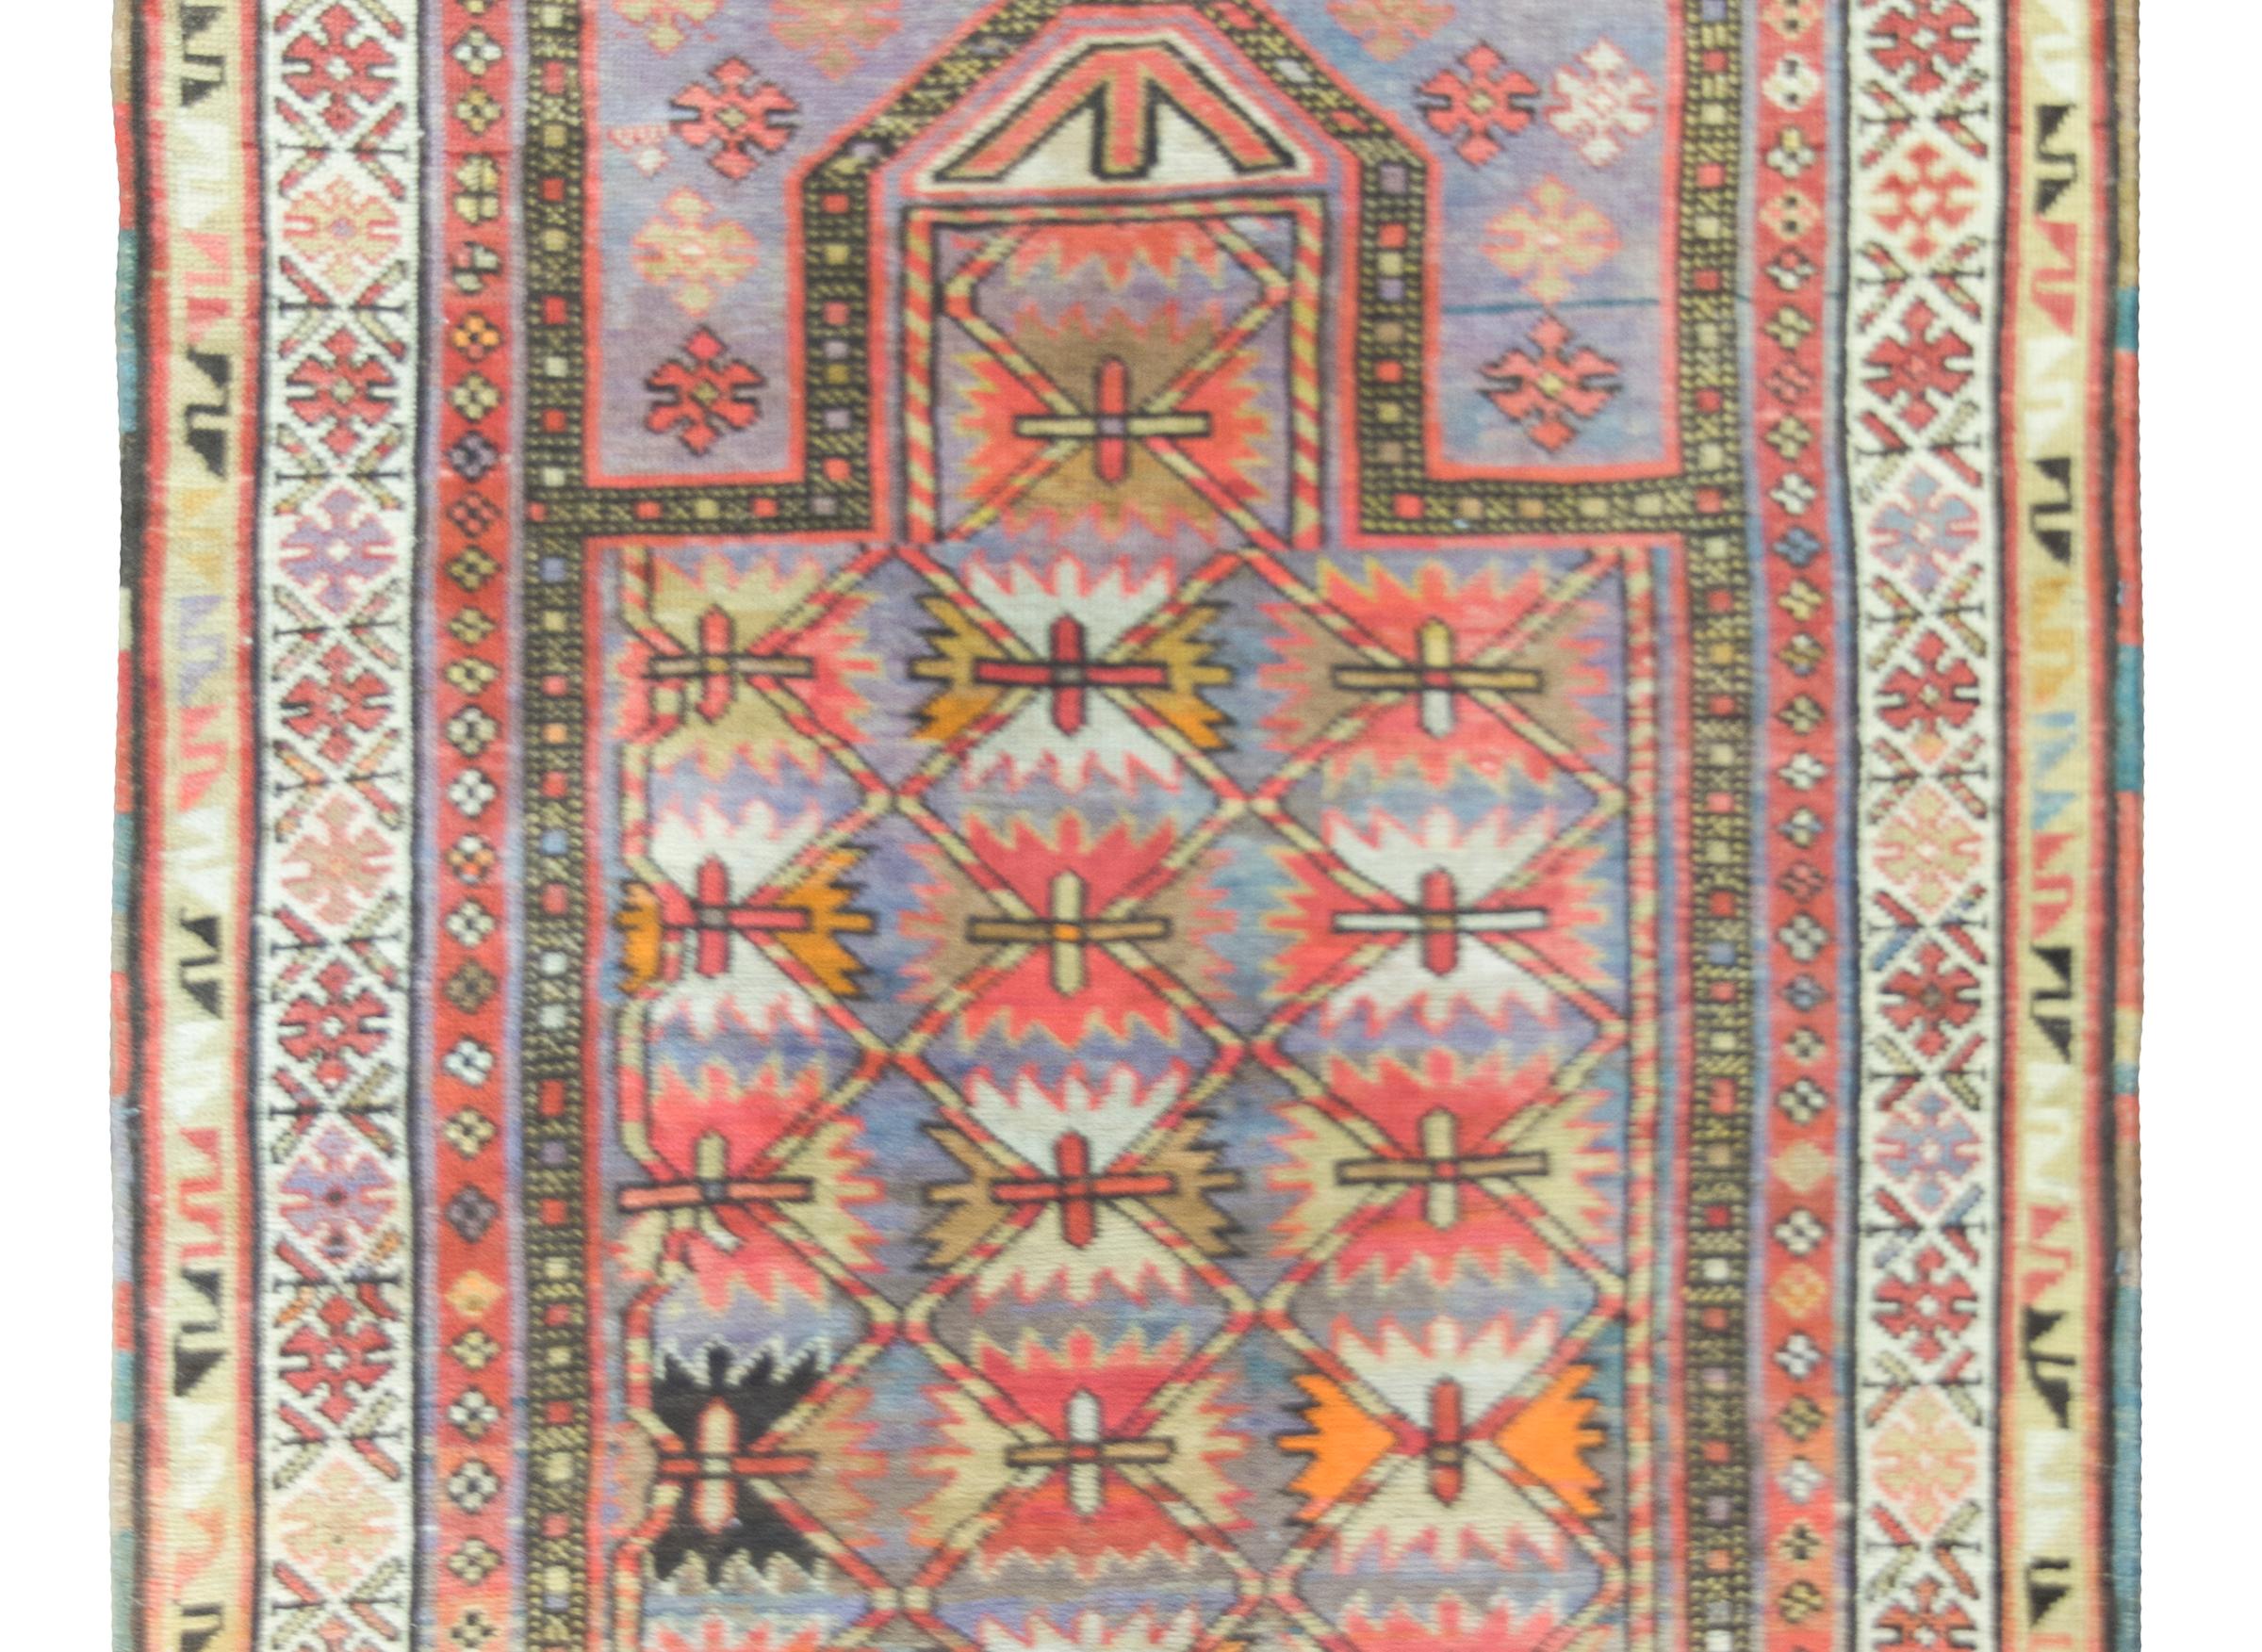 A beautiful early 20th century Persian Kuba prayer rug with a central field covered in stylized flowers and surrounded by a complex border with even more stylized flowers, and all wocenin coral, orange, violet, cream, and gold.